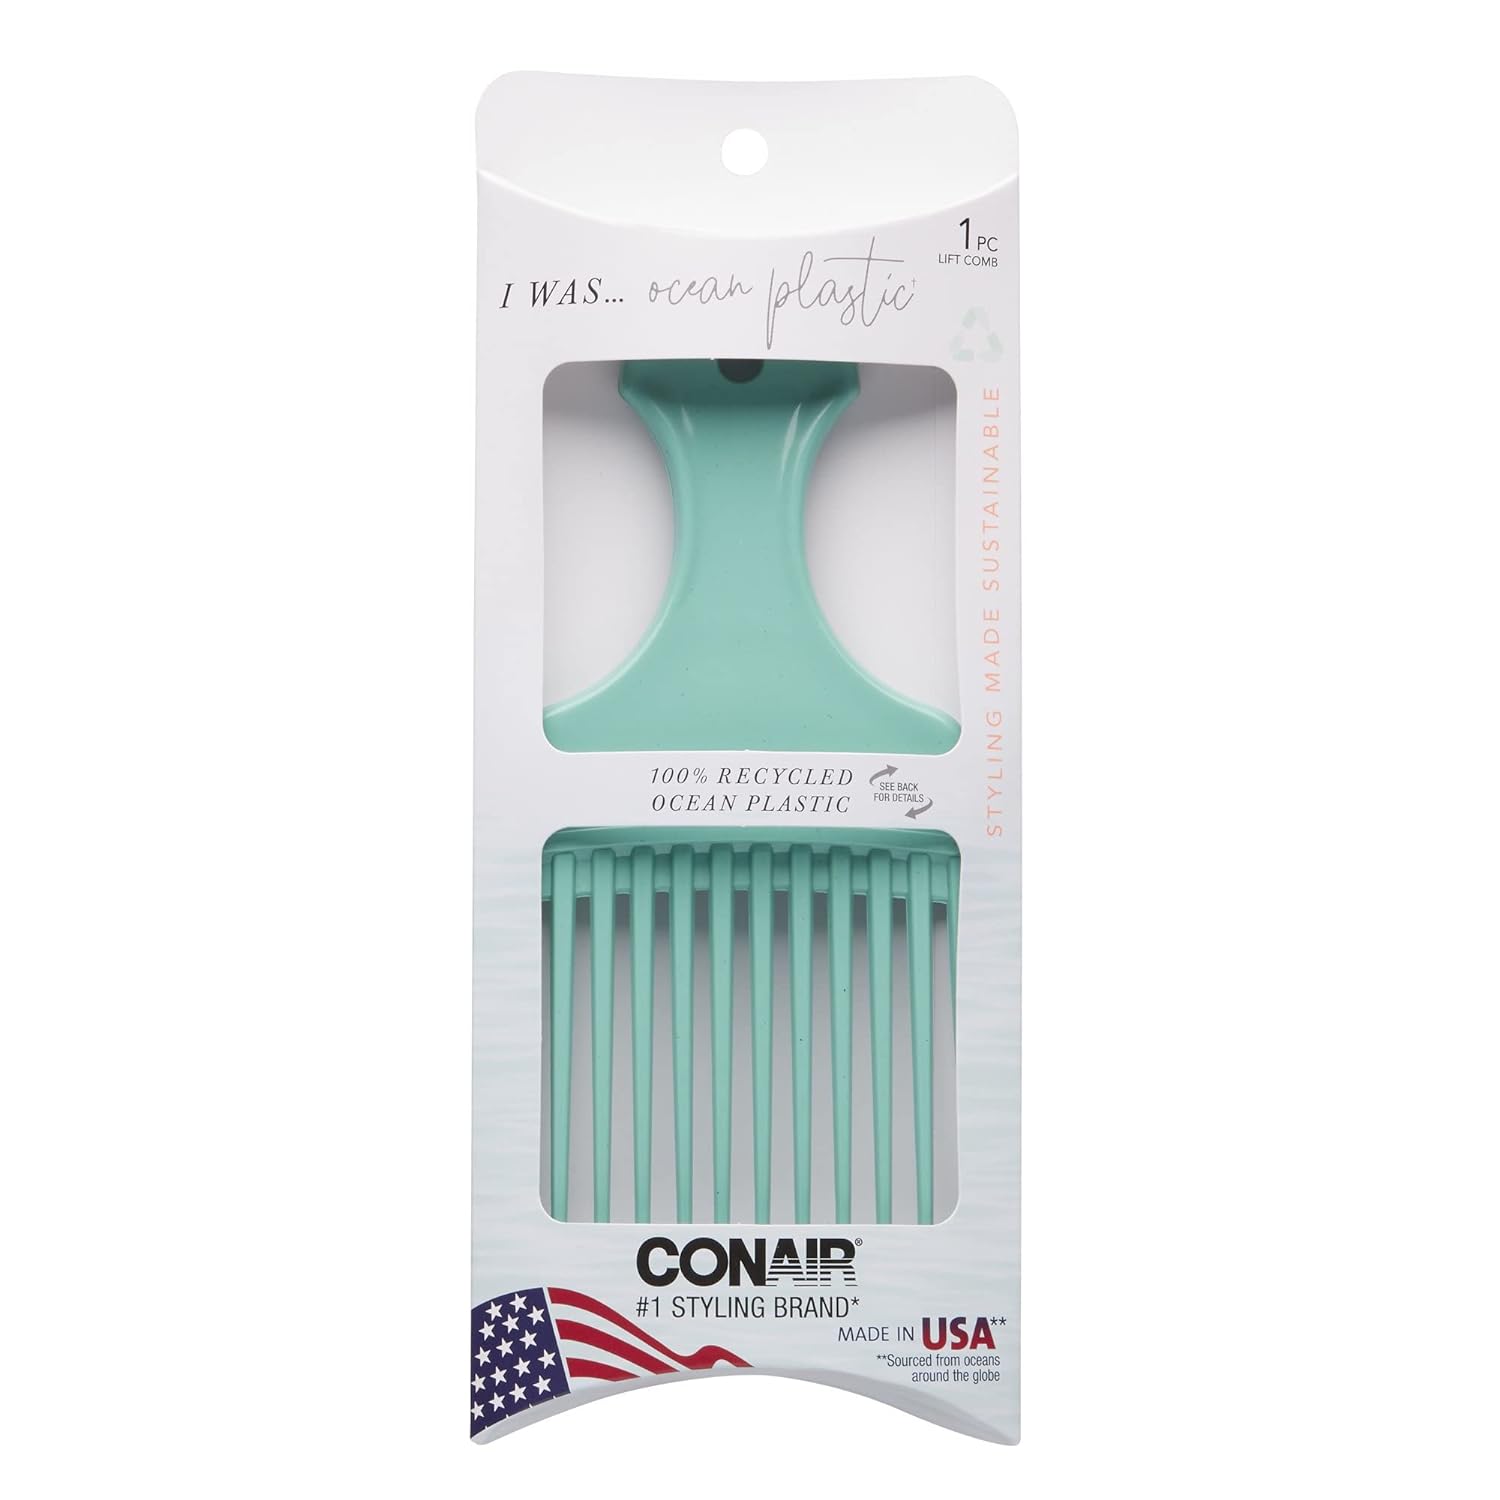 Conair Earth-Friendly Planet Upcycled Toothed Hair Pick Comb Mint-Green UPC:074108931122 Pack:48/3